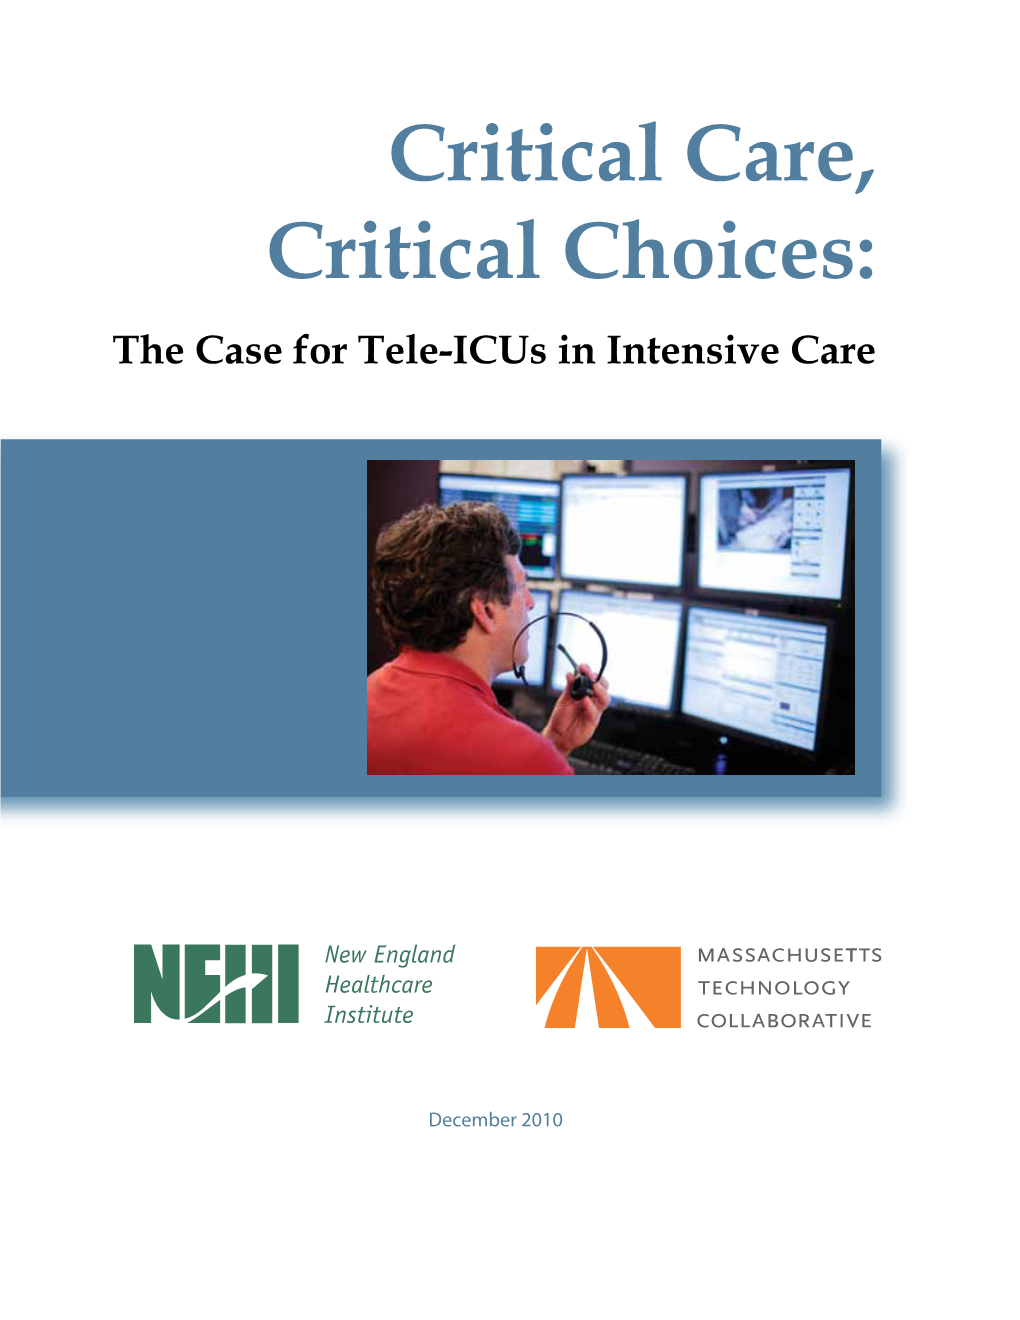 Critical Care, Critical Choices: the Case for Tele-Icus in Intensive Care